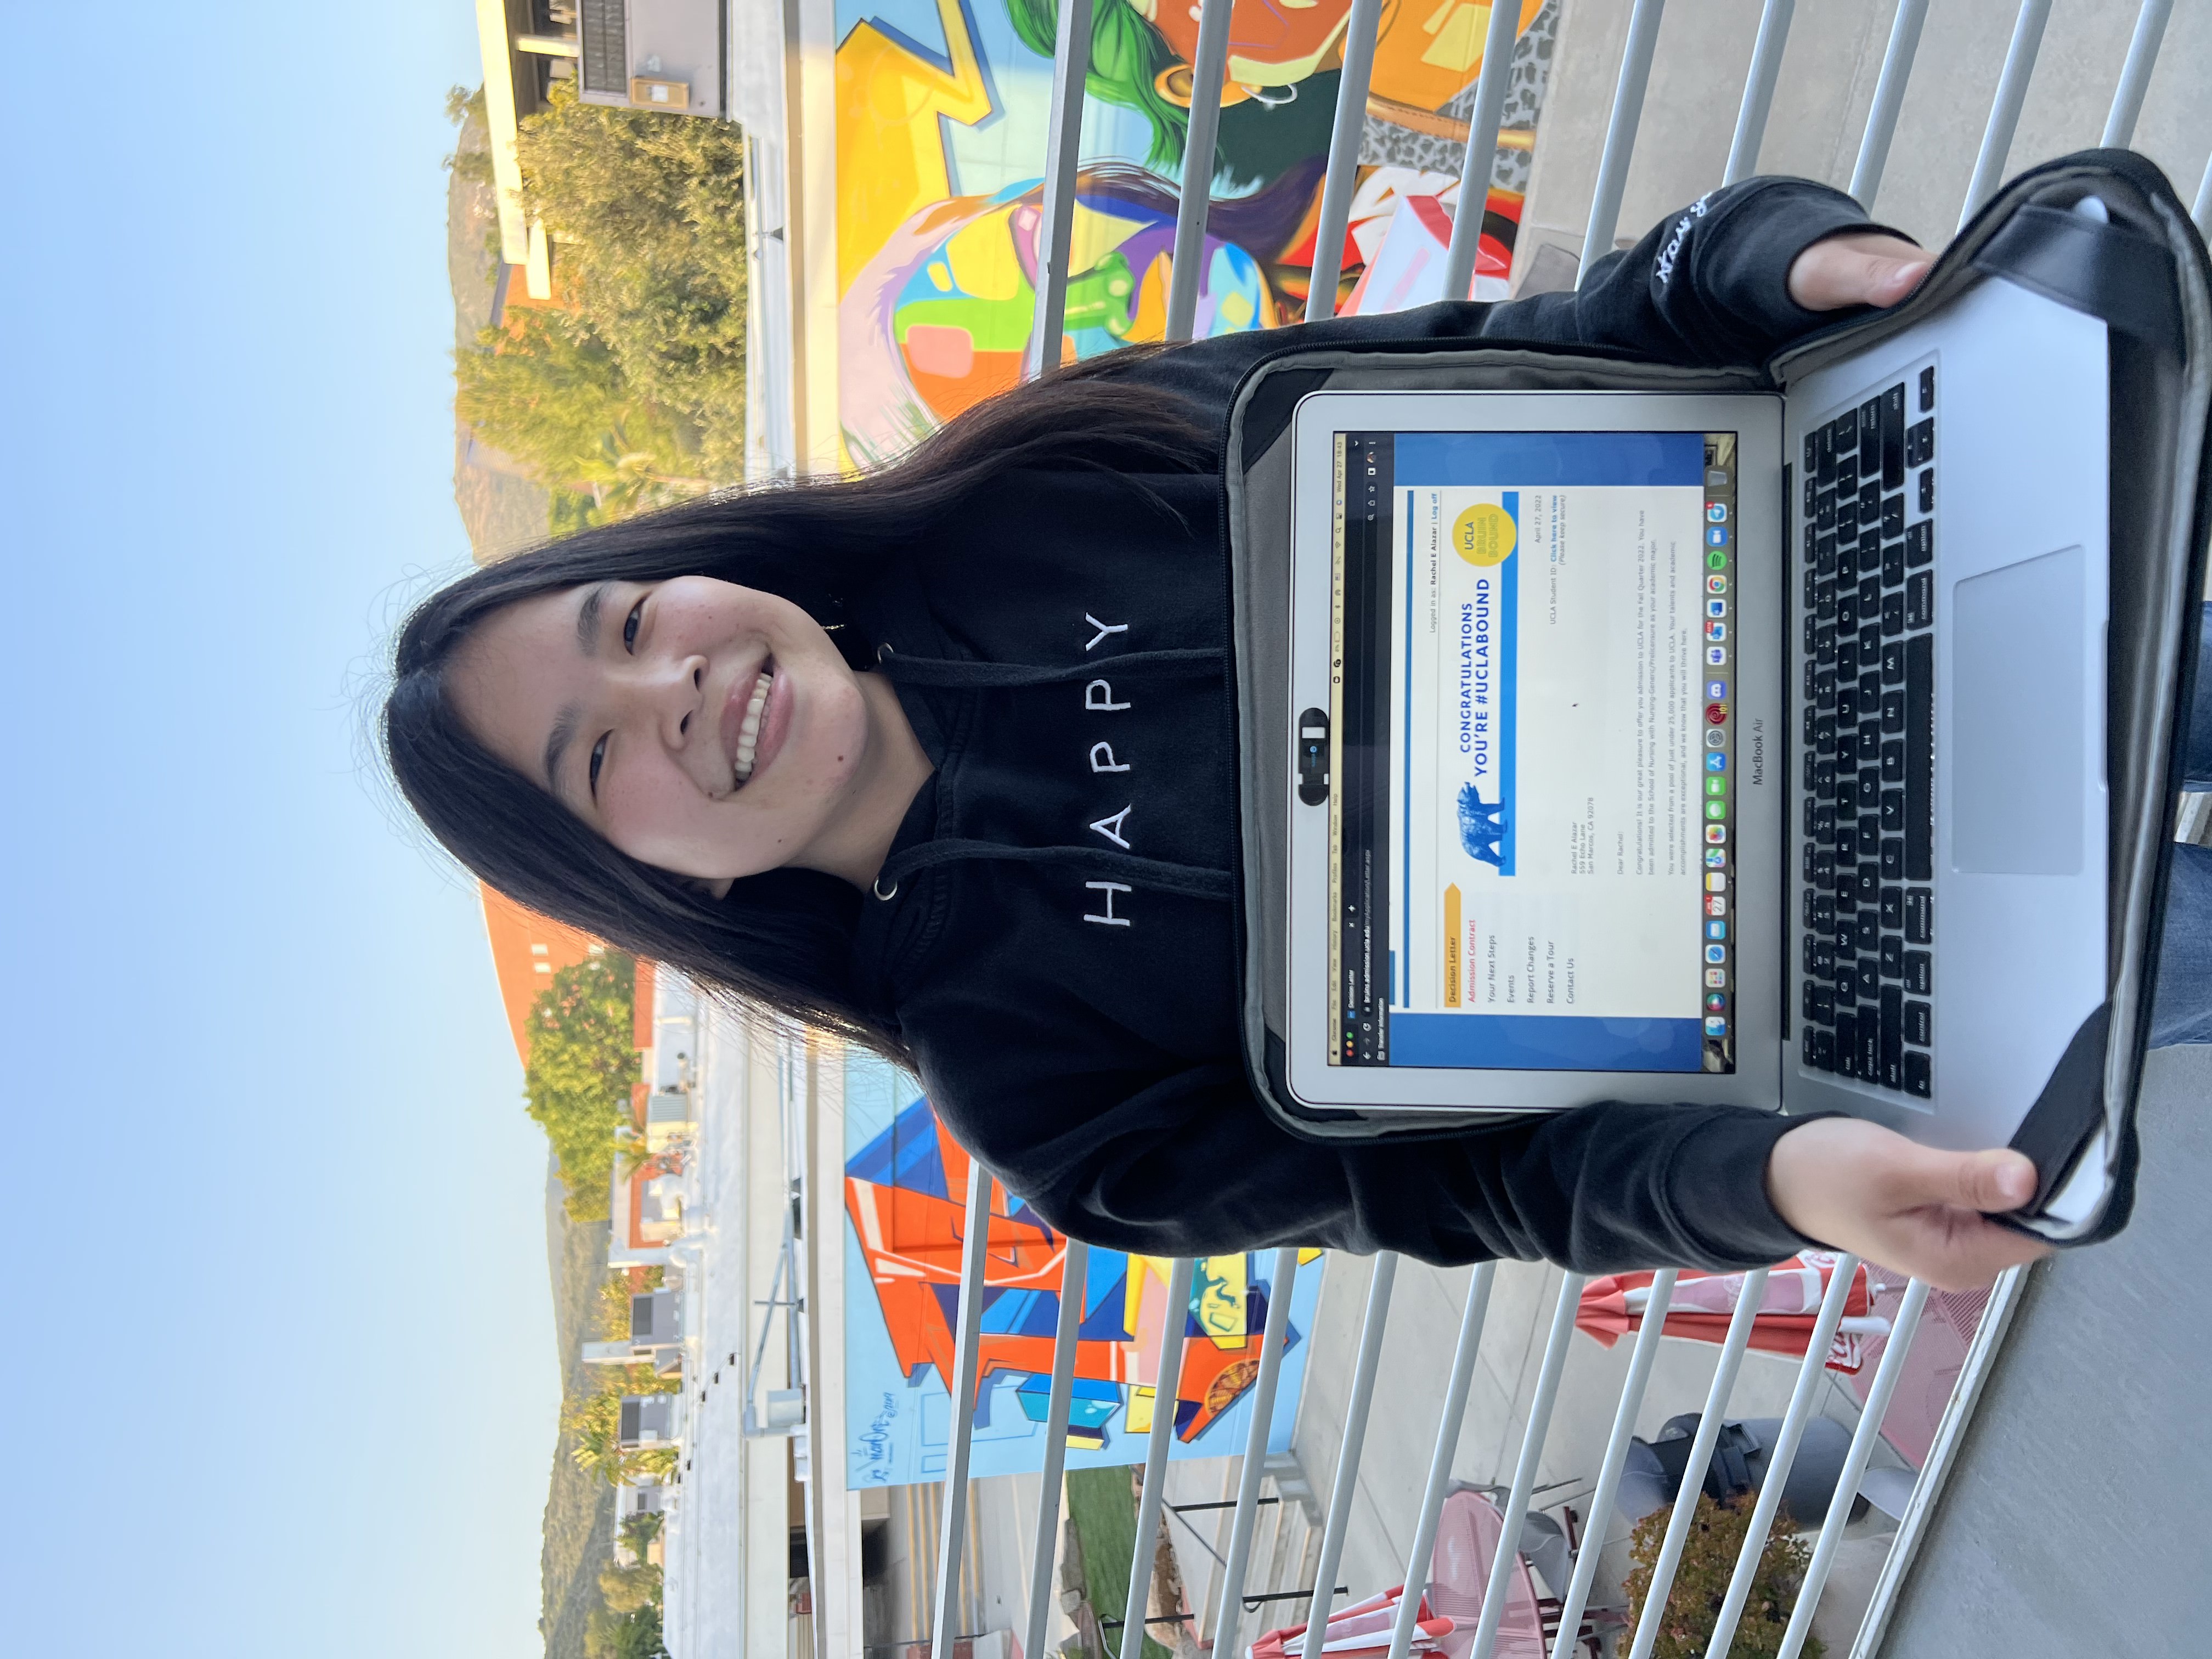 Rachel Alazar wears a black sweatshirt and holds out her laptop computer